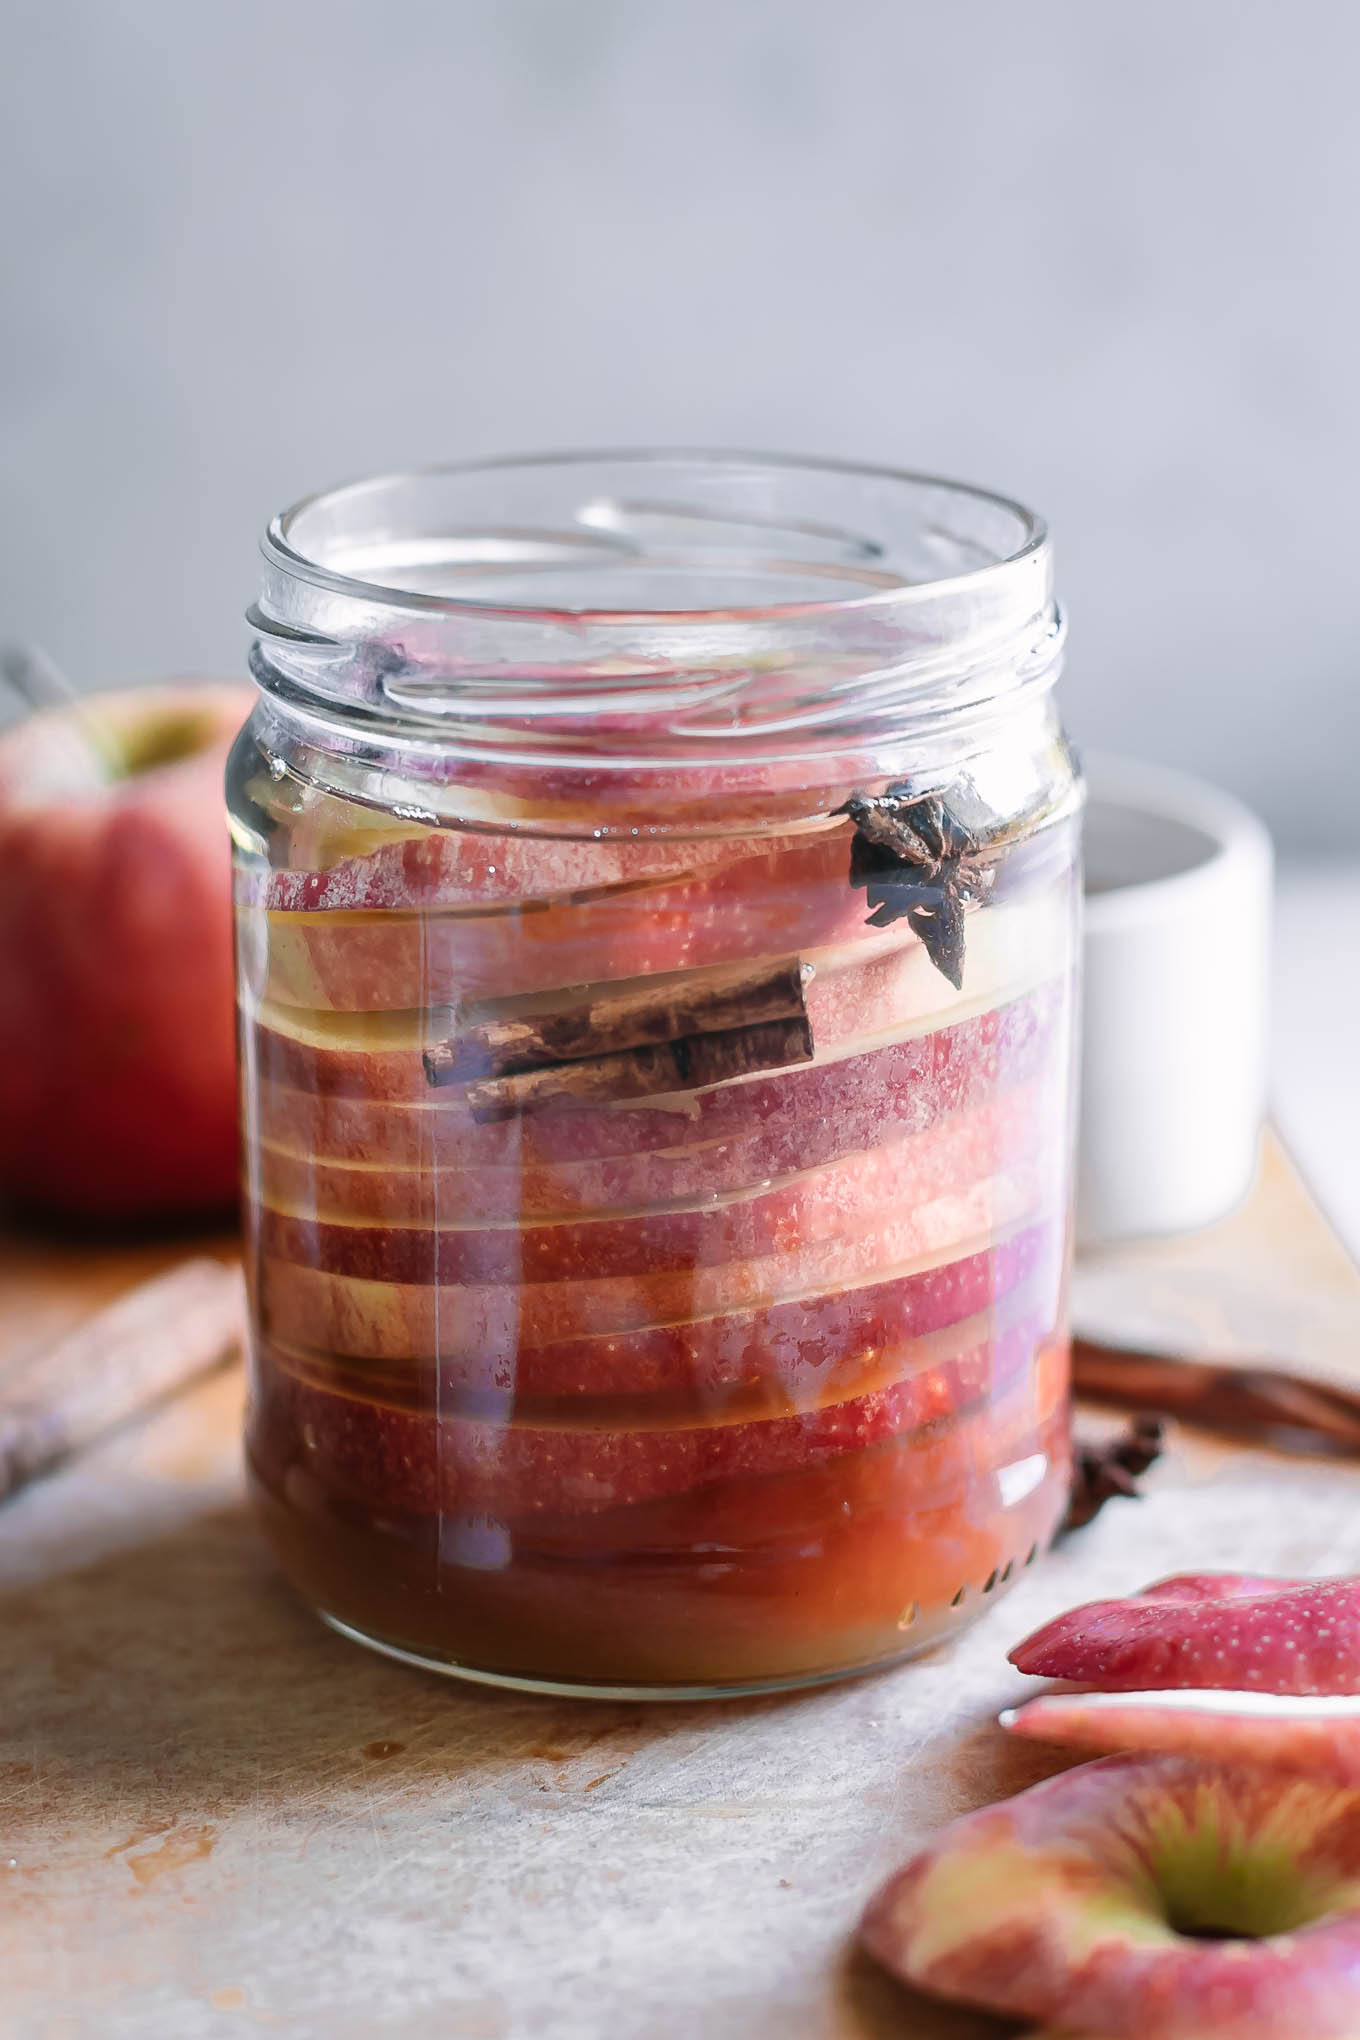 apple slices in a jar with cinnamon and star anise before pickling